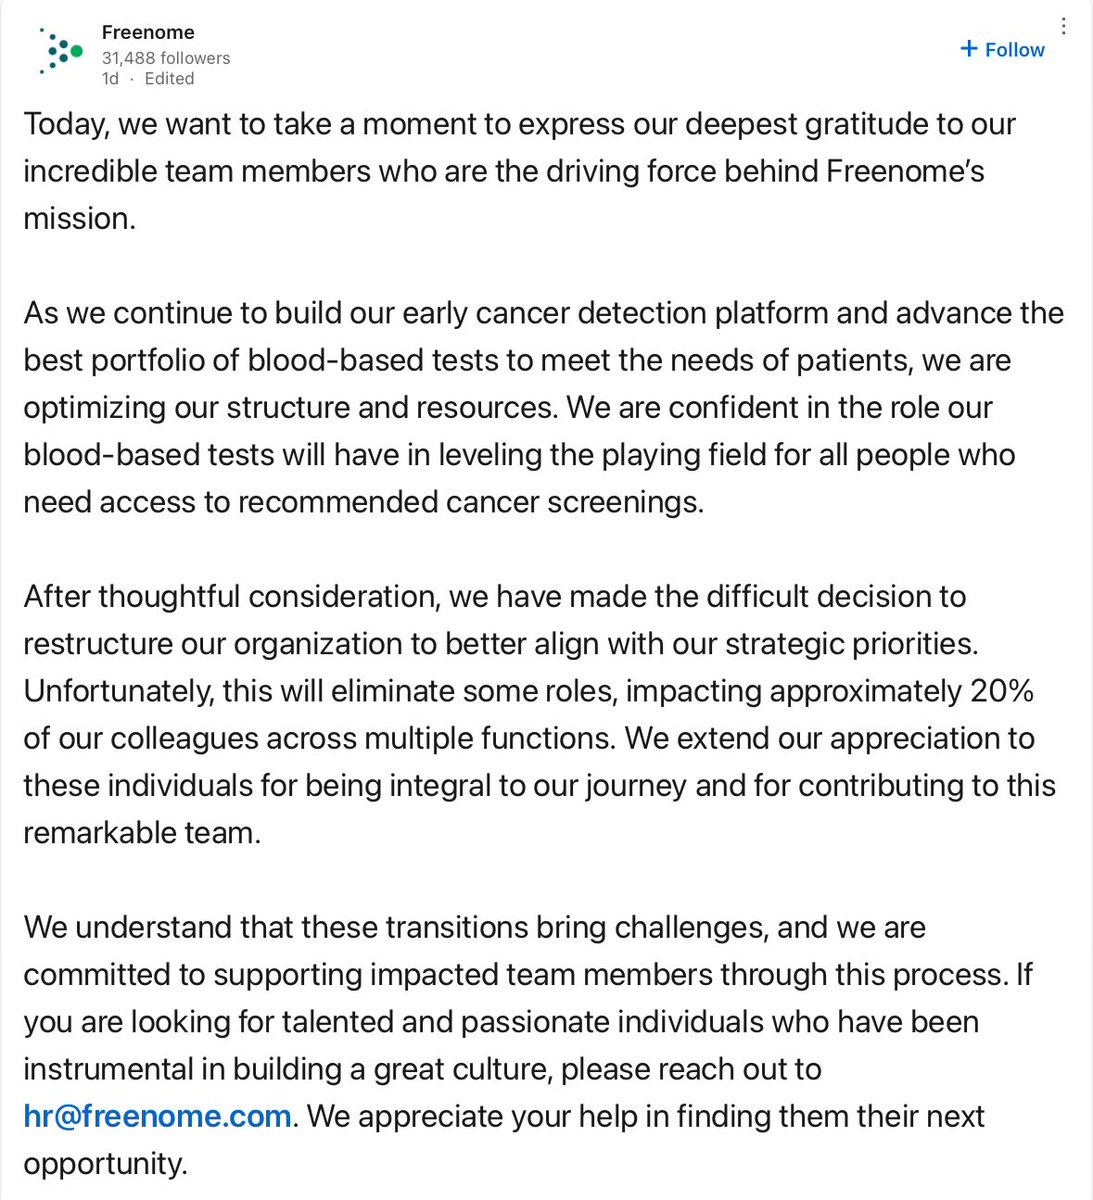 🚨 LAYOFF ALERT - California 🇺🇸

Freenome, a developer of a multi-omics platform for early cancer detection through routine blood draws, will lay off 20% of its workforce, affecting over 100 employees.